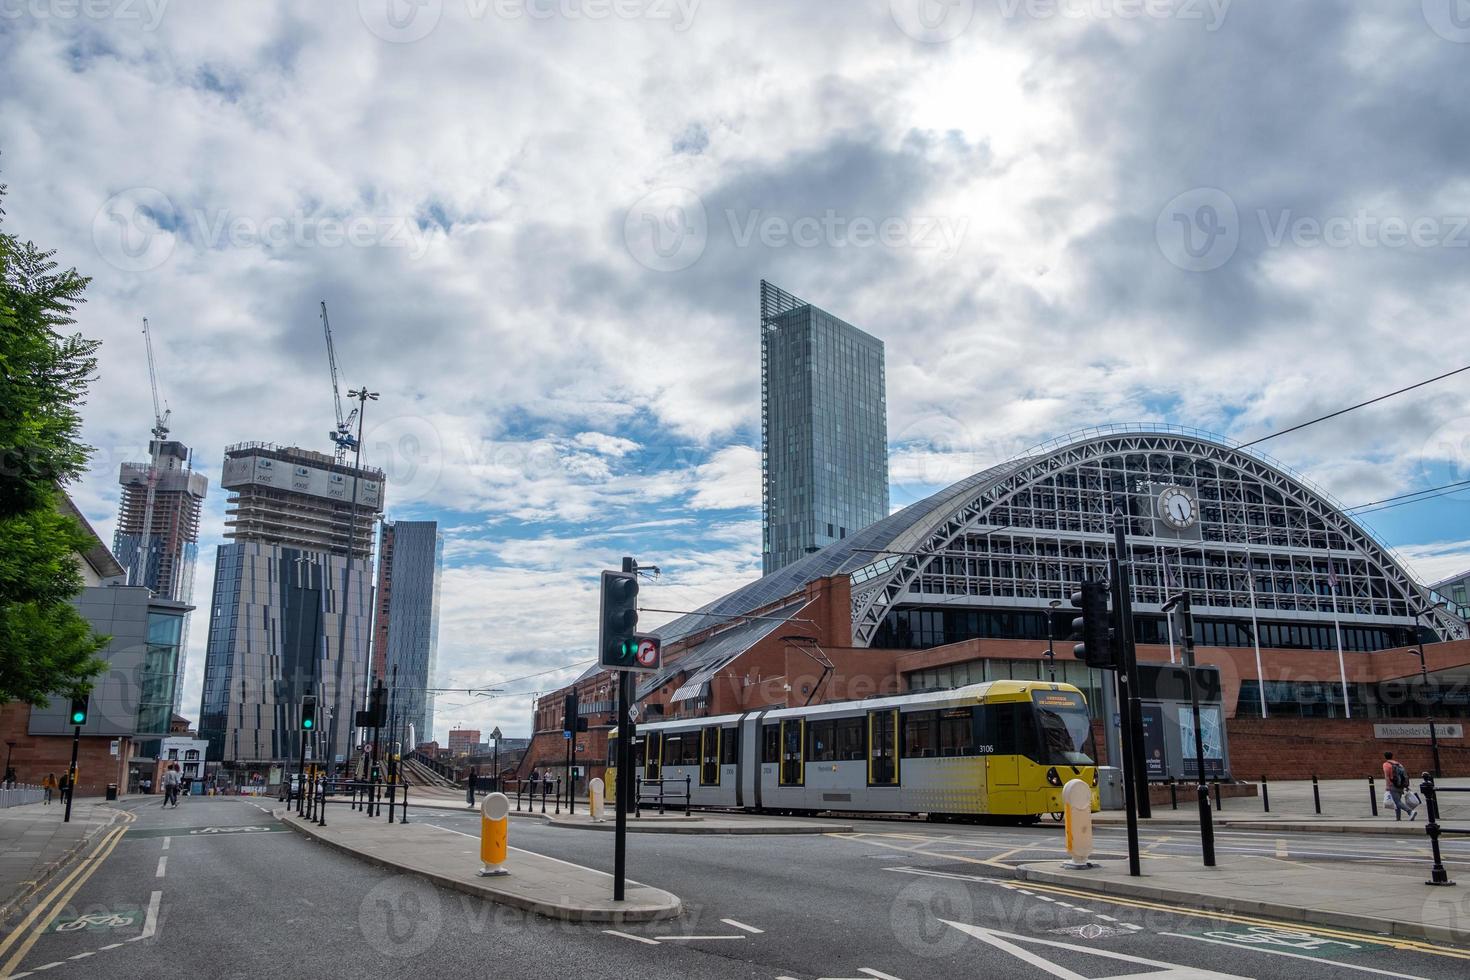 The Manchester Central Convention Complex in the foreground and extensive construction in the background. Greater Manchester is experiencing a building boom of new commercial buildings photo